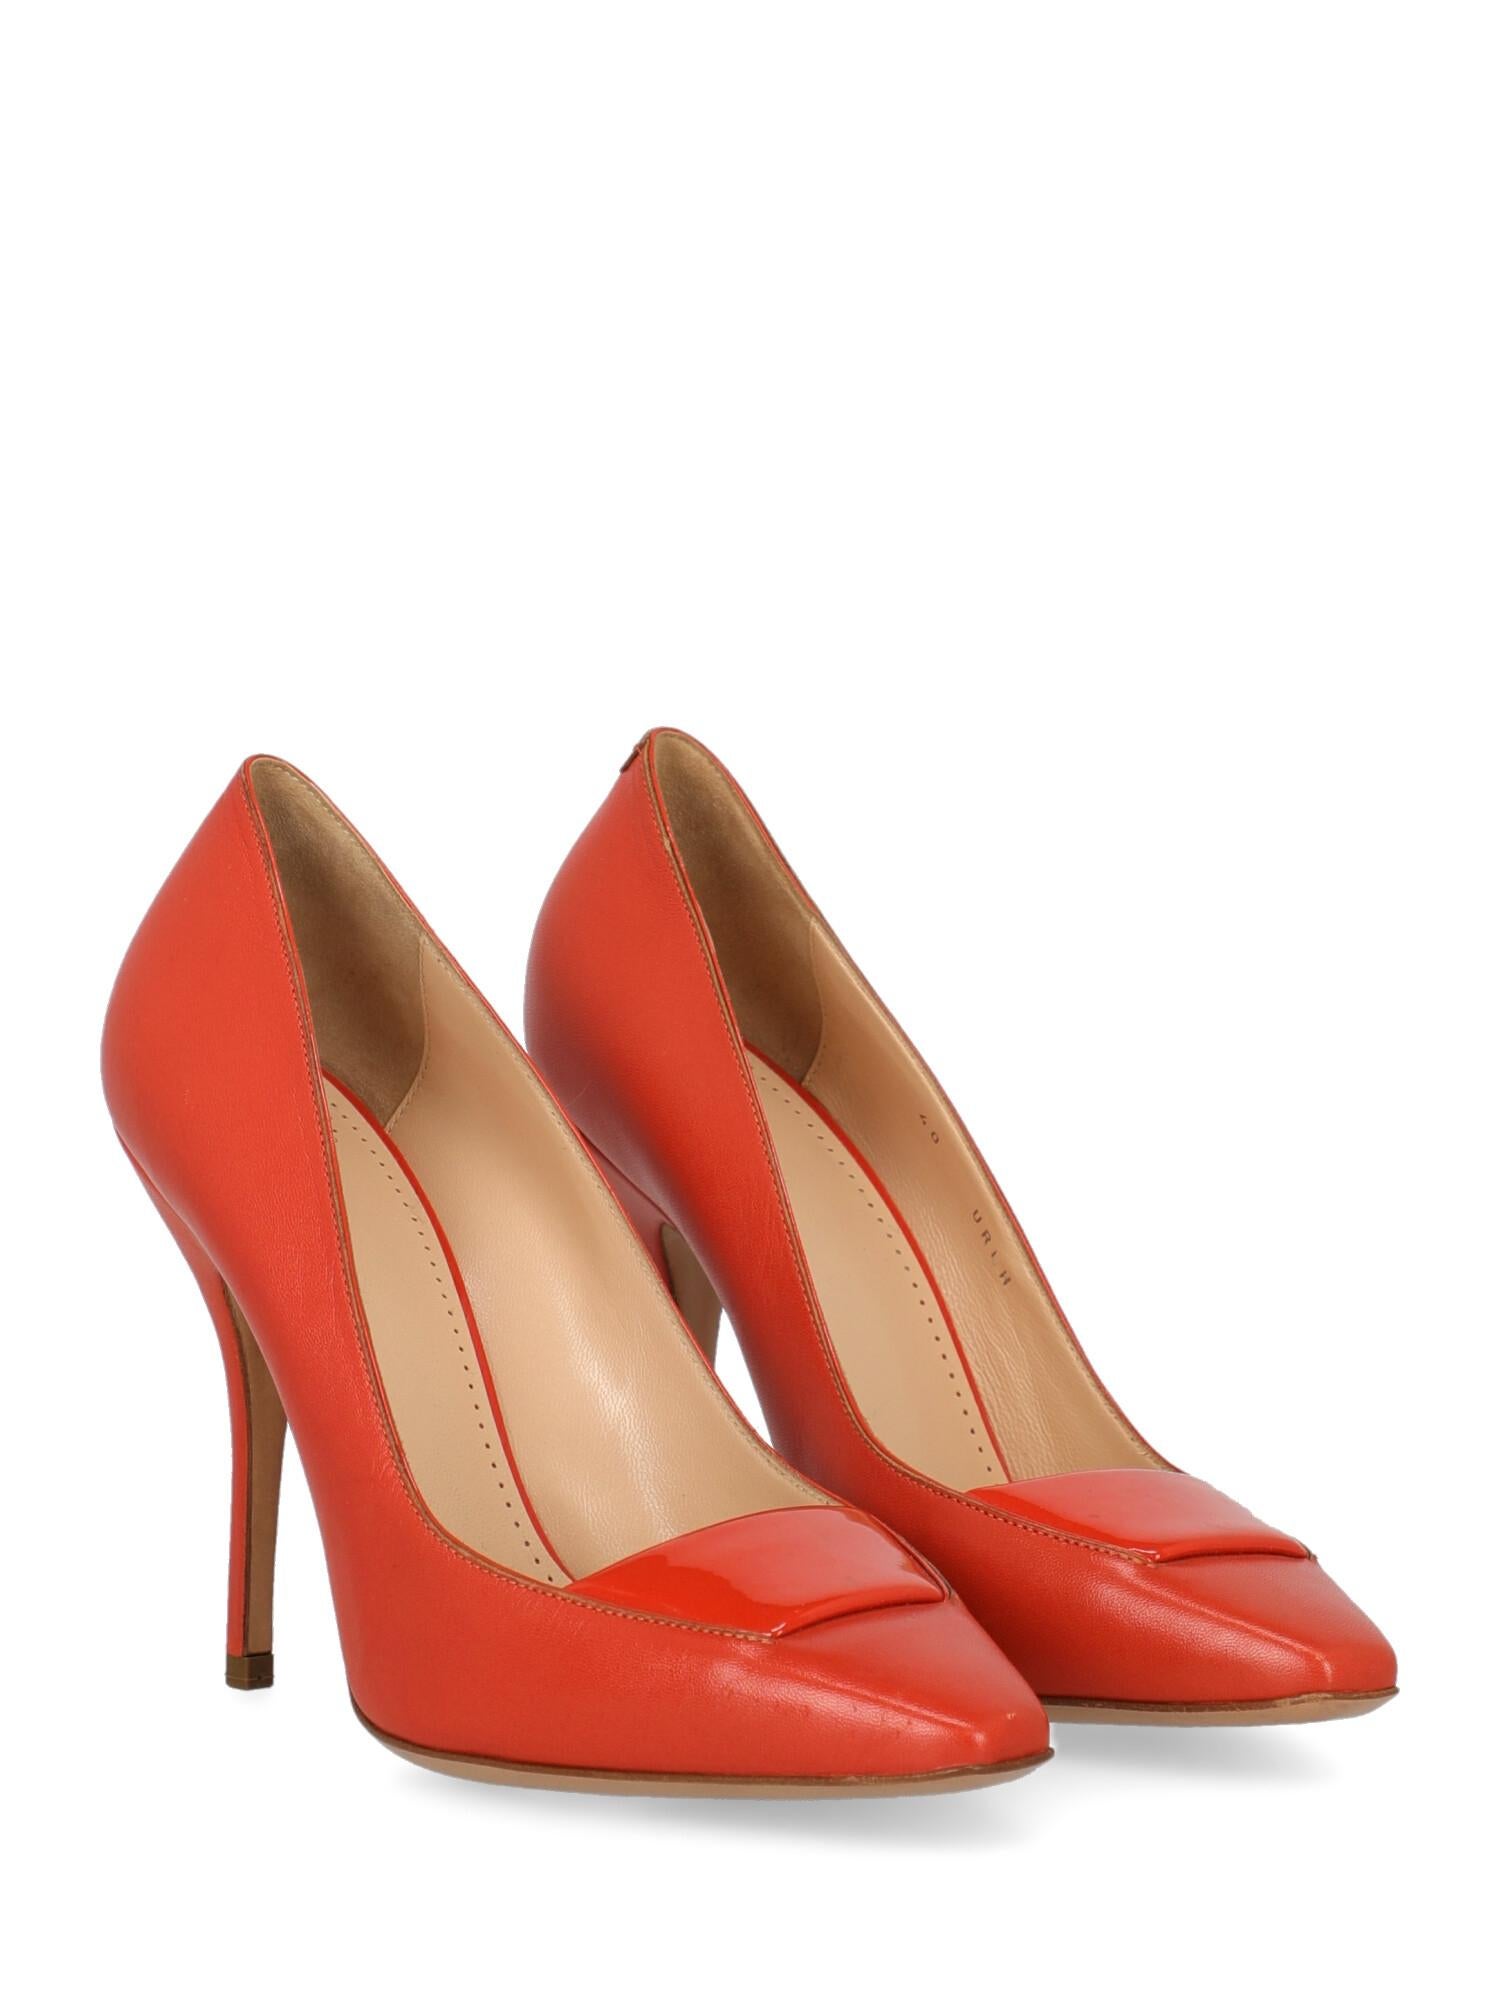 Shoe, leather, solid color, square toe, branded insole, tapered heel, high heel, patent trim.

Includes: N/A

Product Condition: Very Good
Sole: negligible marks. Upper: negligible scuffing, negligible stains. Insole: negligible